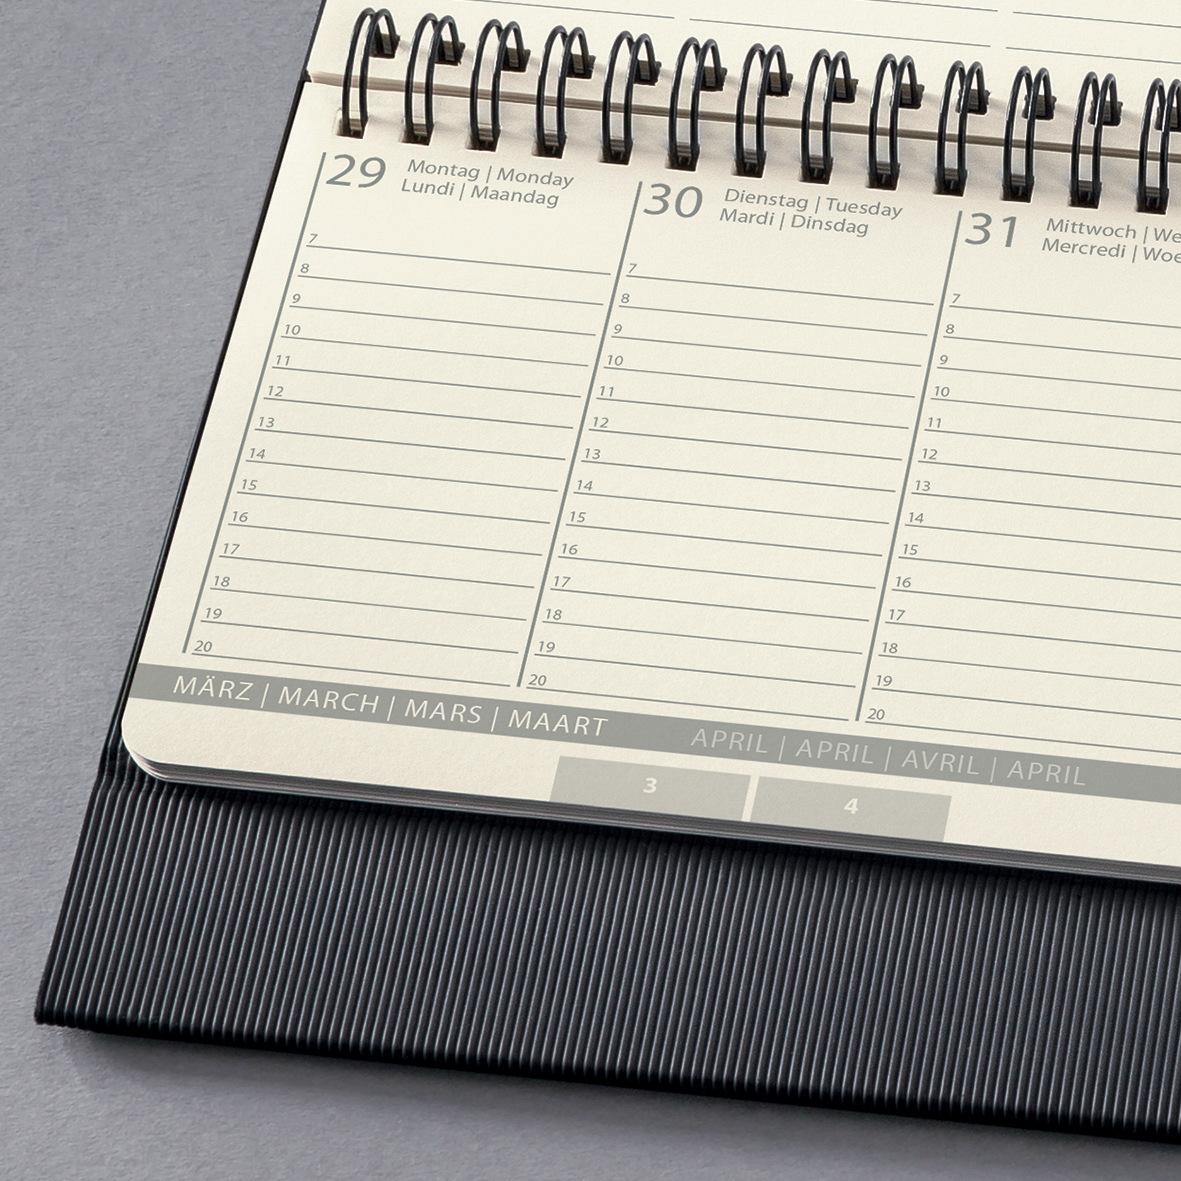 Diaries, calendars and planners